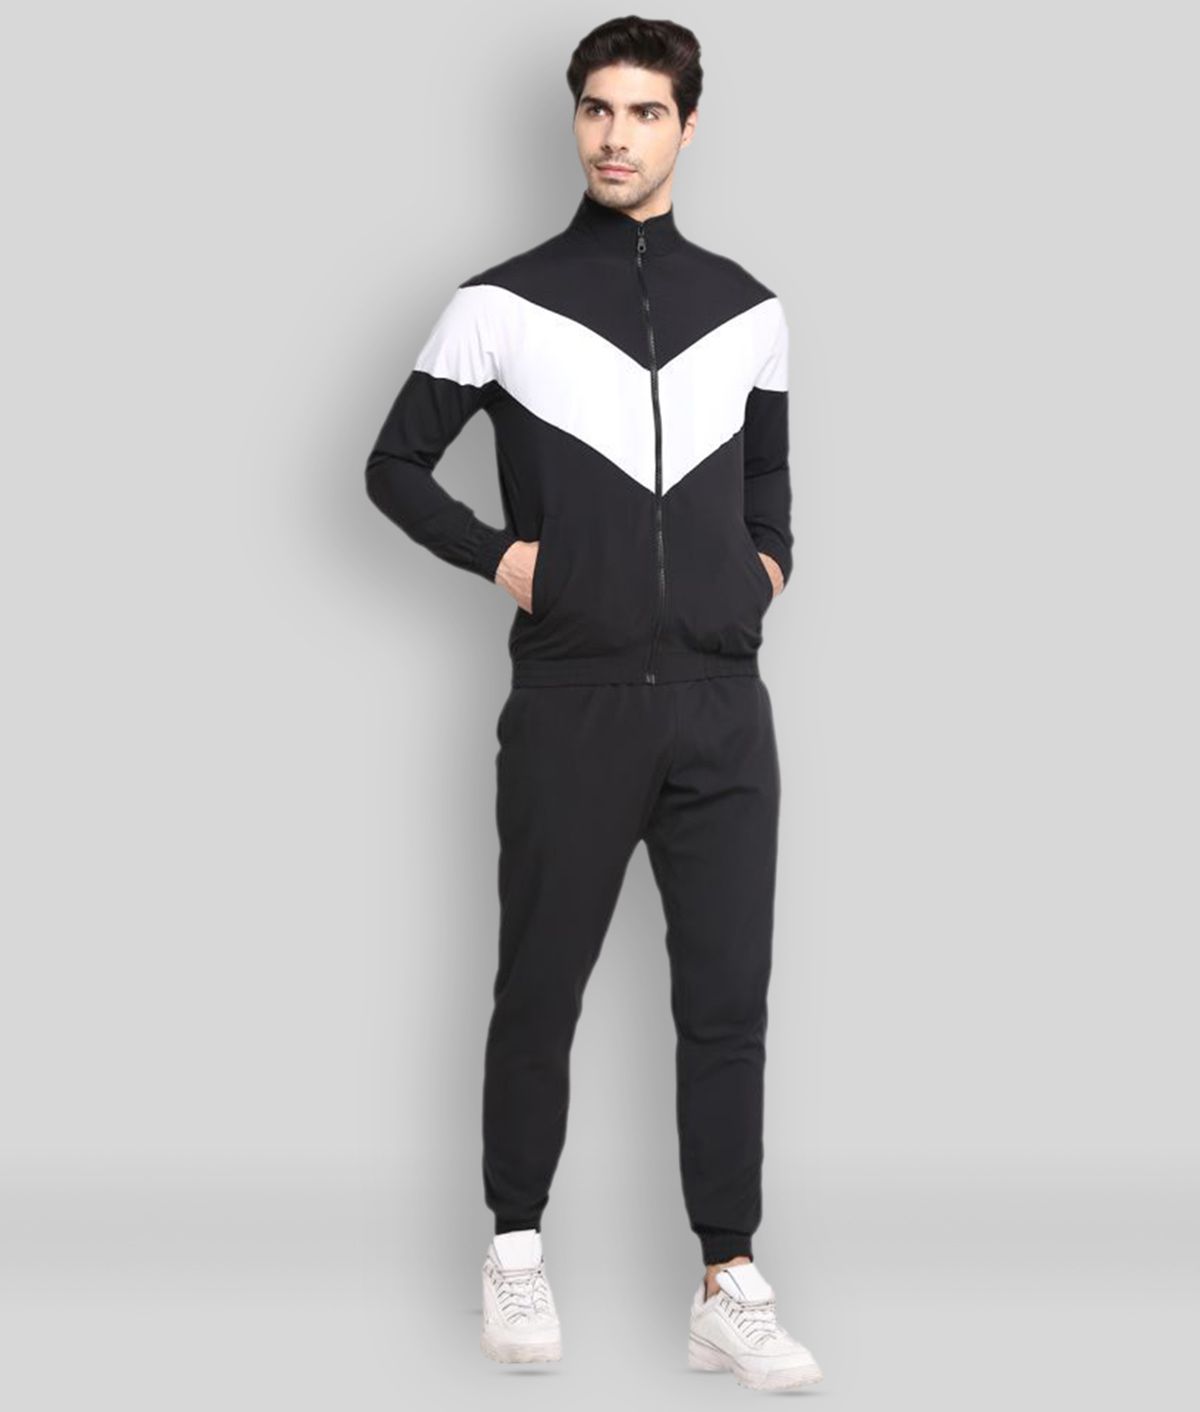     			OFF LIMITS - Multicolor Polyester Regular Fit Colorblock Men's Sports Tracksuit ( Pack of 1 )